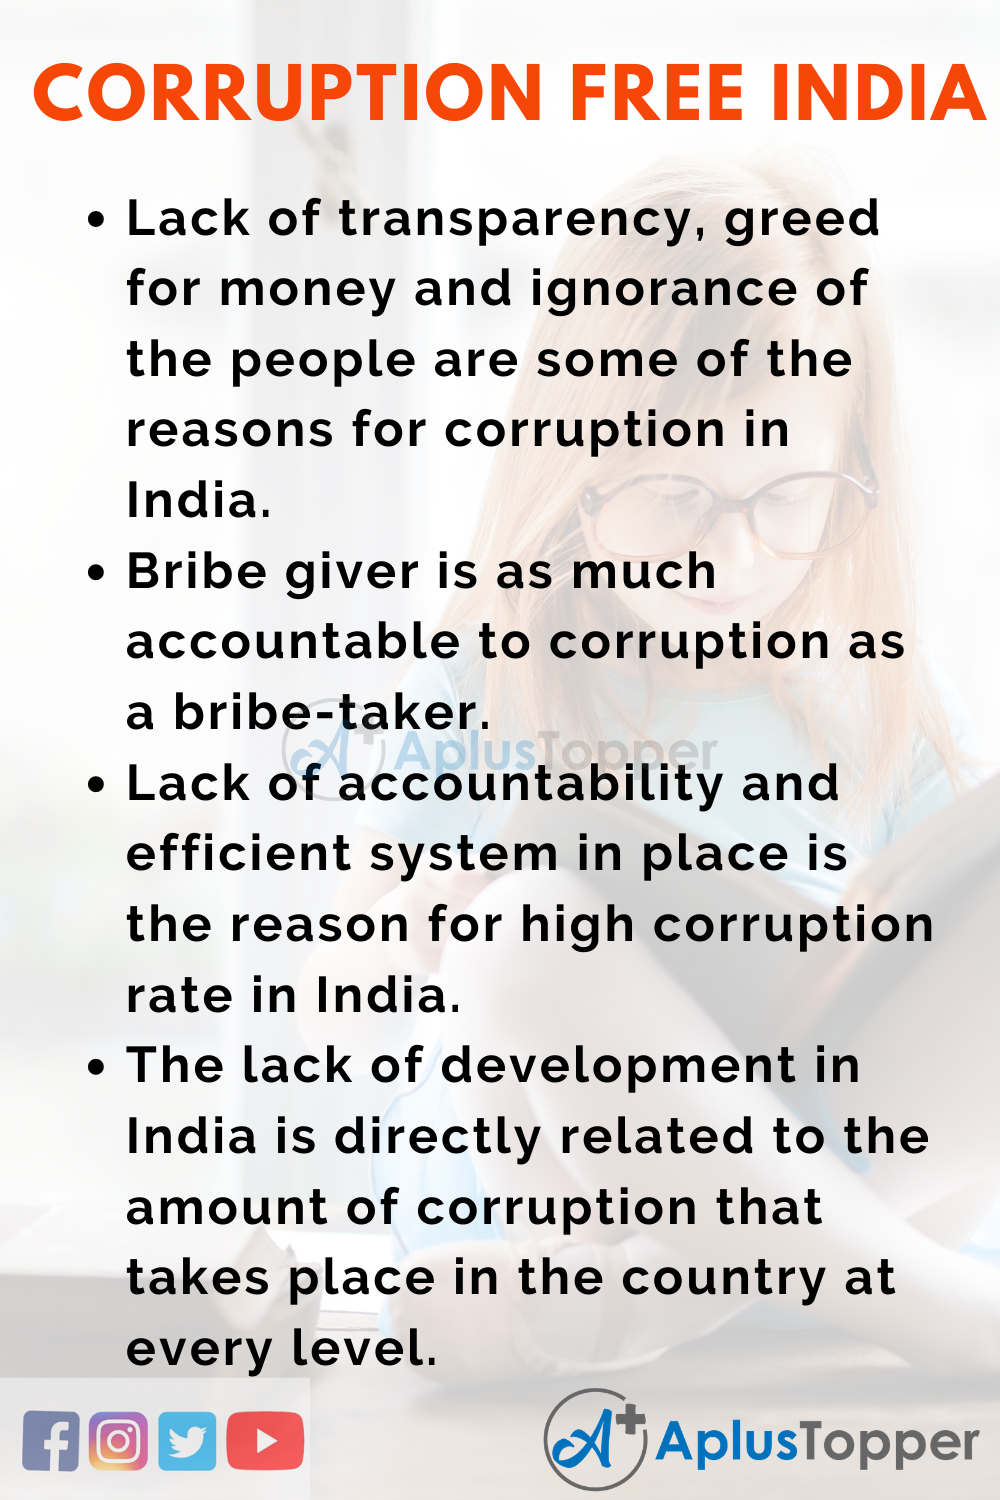 essay on corruption free india for a developed country